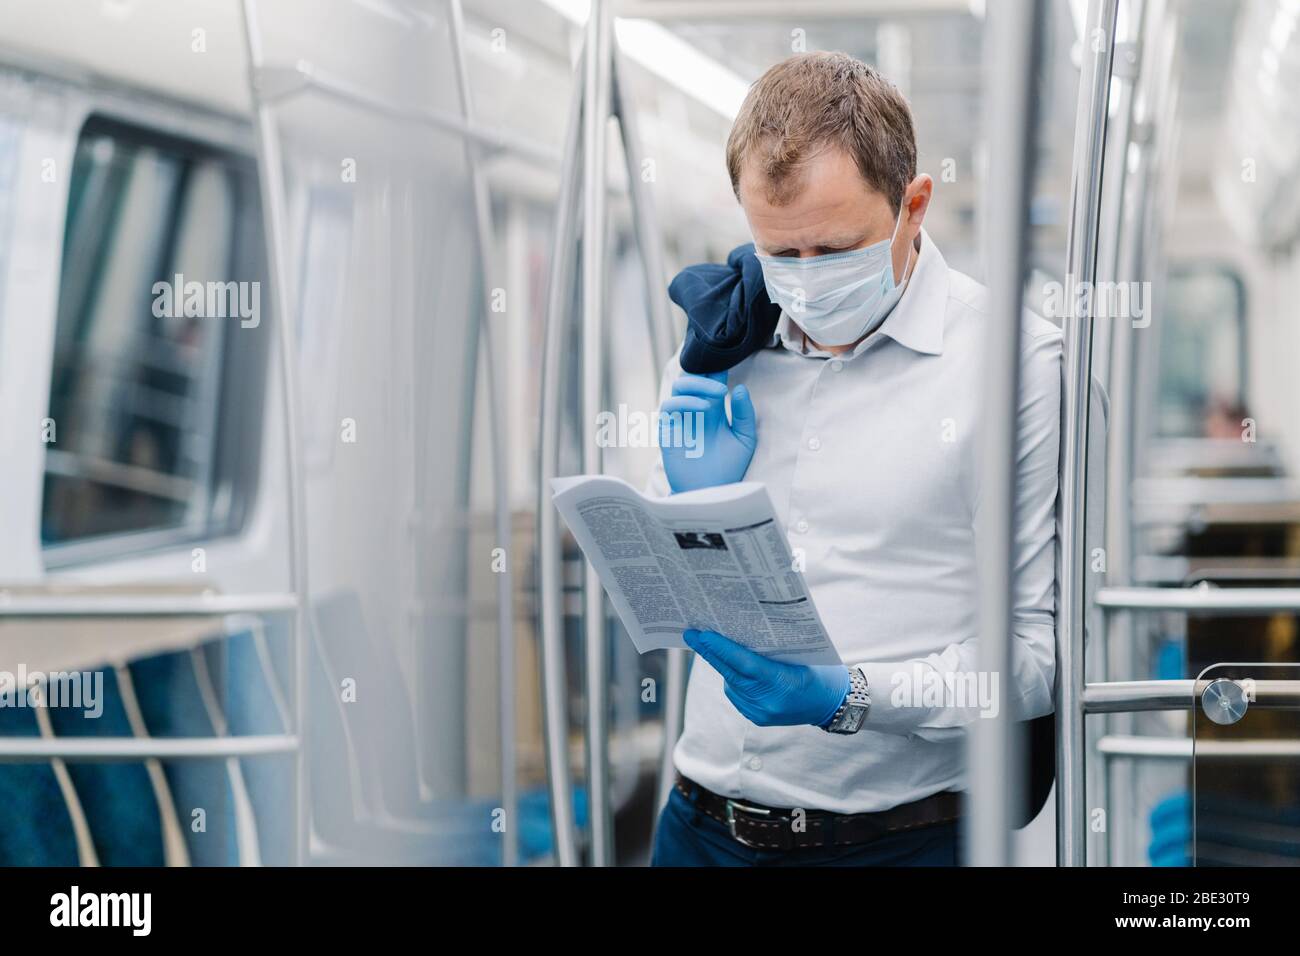 Coronavirus pandemic, Covid-19, quarantine measure. Serious adult man in white shirt, holds black jacket, concentrated in newspaper, wears protective Stock Photo